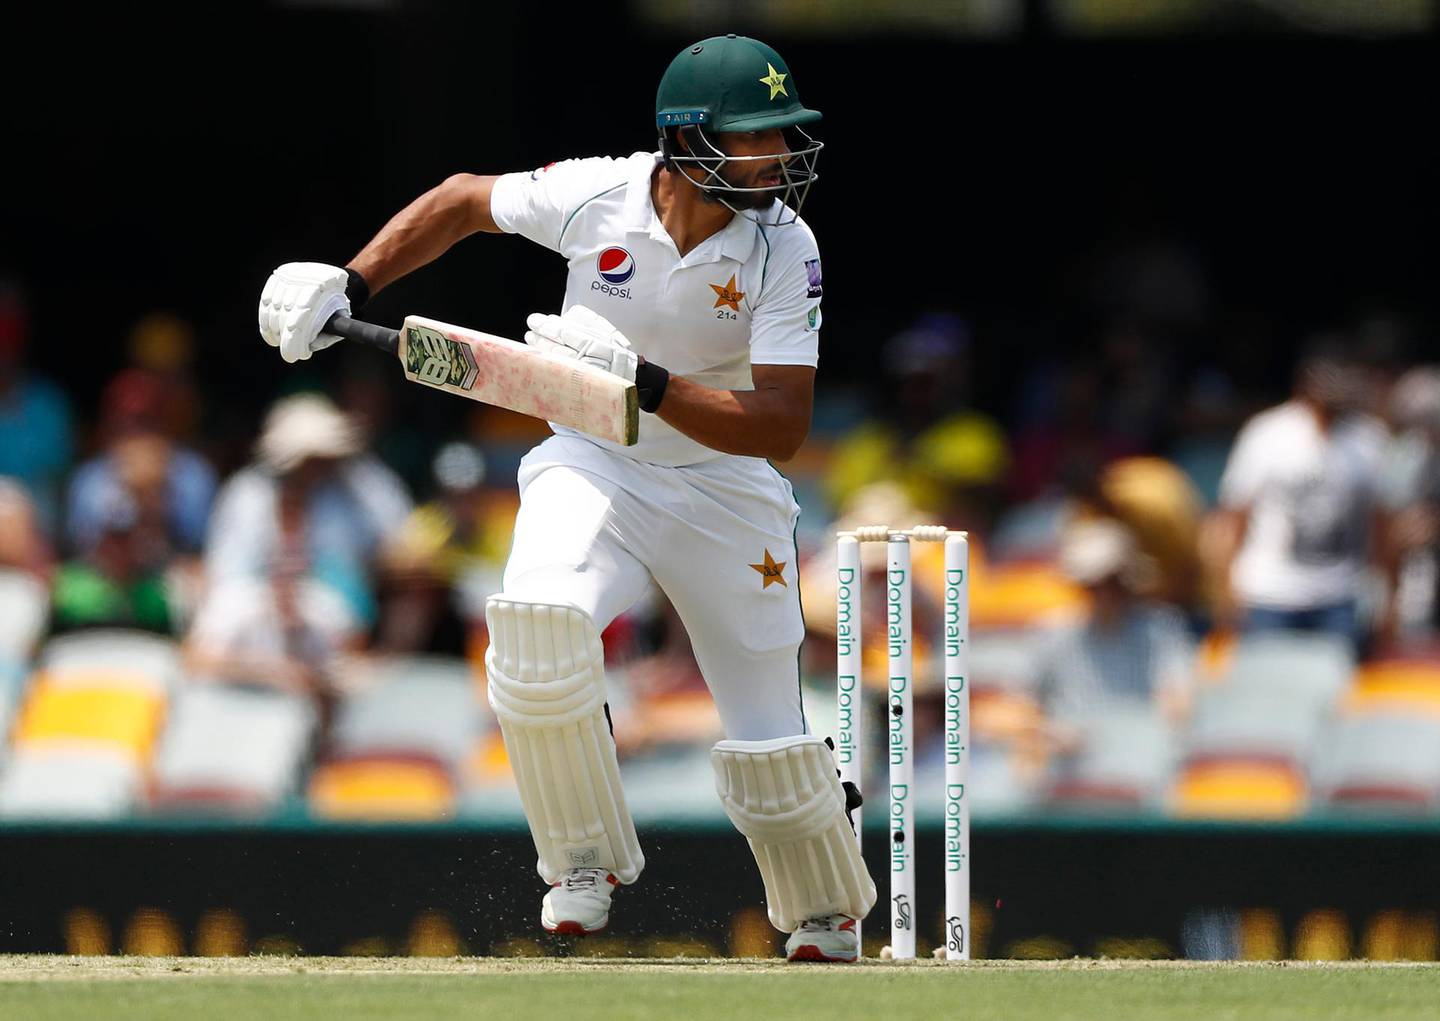 BRISBANE, AUSTRALIA - NOVEMBER 21: Shan Masood of Pakistan bats during day one of the 1st Domain Test between Australia and Pakistan at The Gabba on November 21, 2019 in Brisbane, Australia. (Photo by Ryan Pierse/Getty Images)